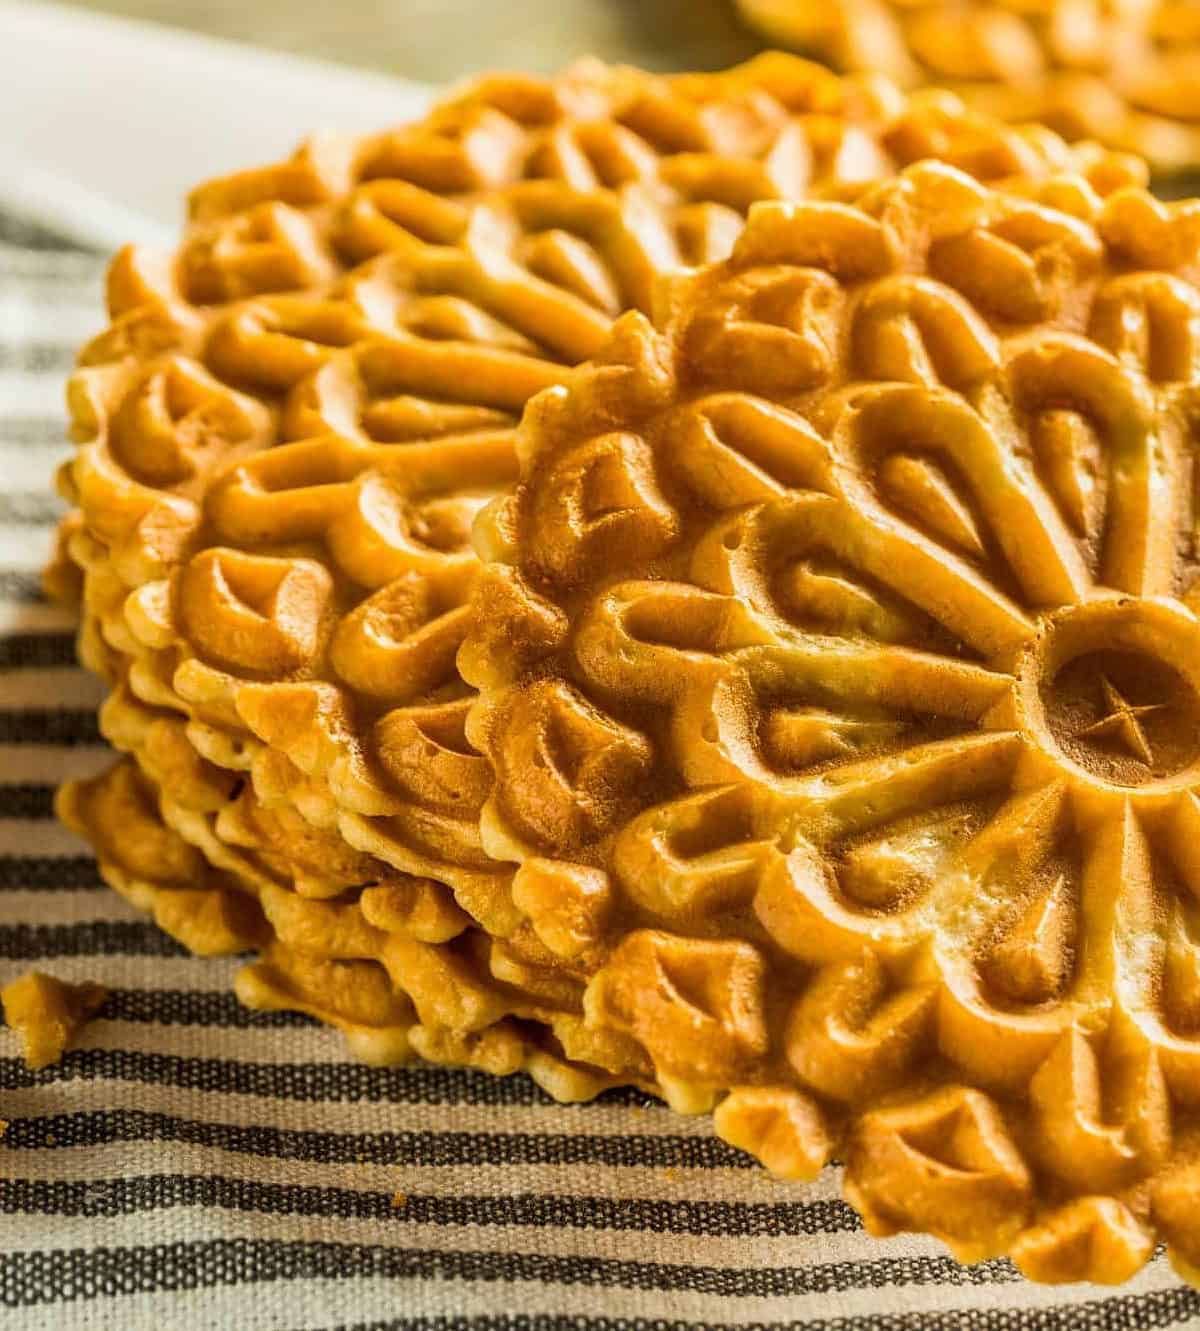  Look at those beautiful golden brown pizzelle!